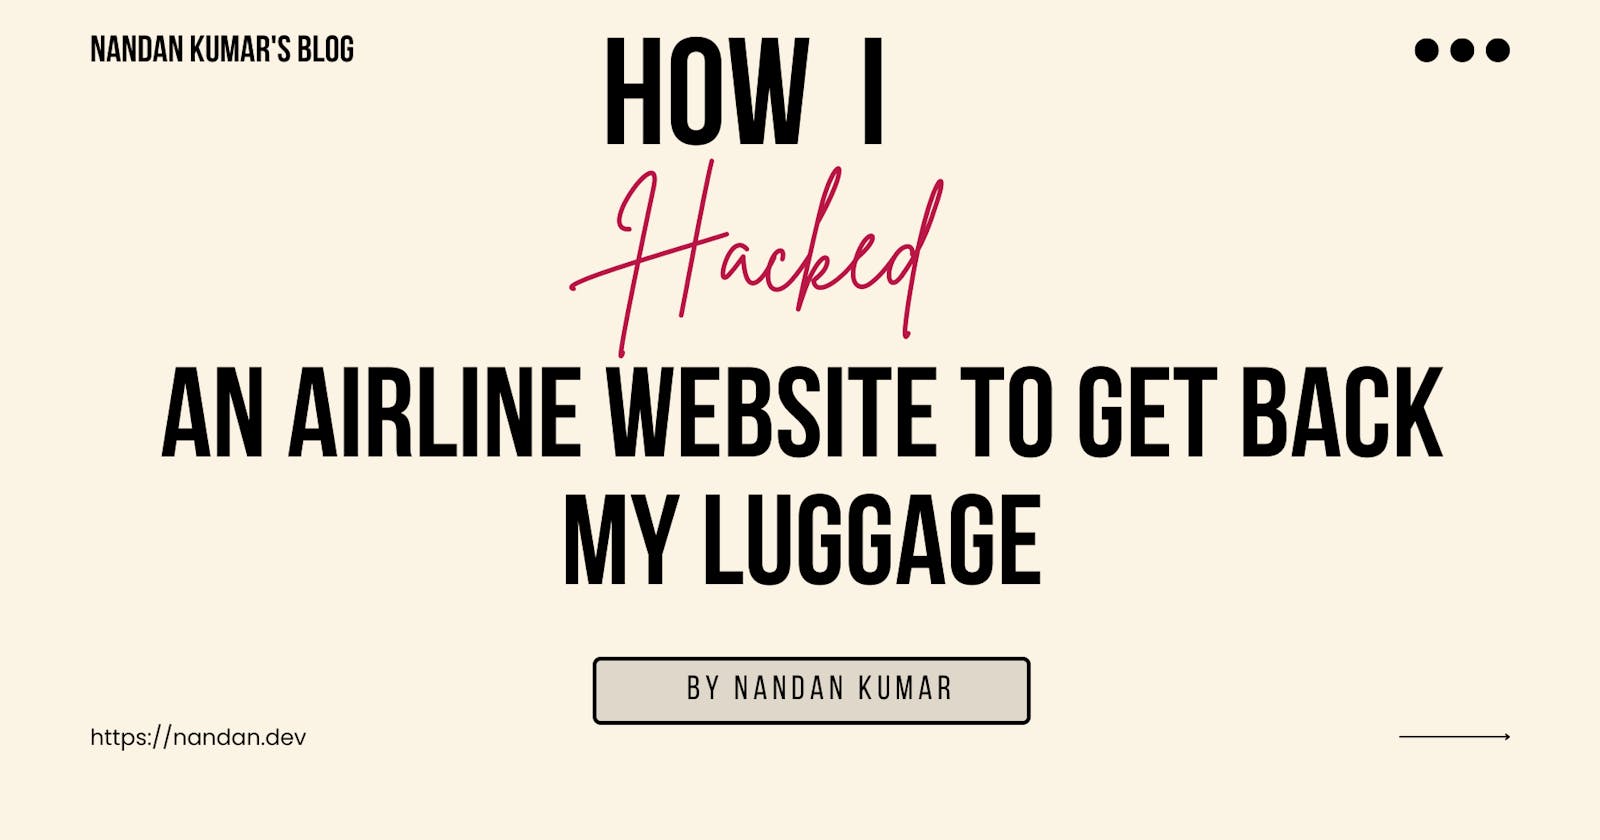 How I "Hacked" an Airline Website to get back my luggage: A first-person insight to the story.